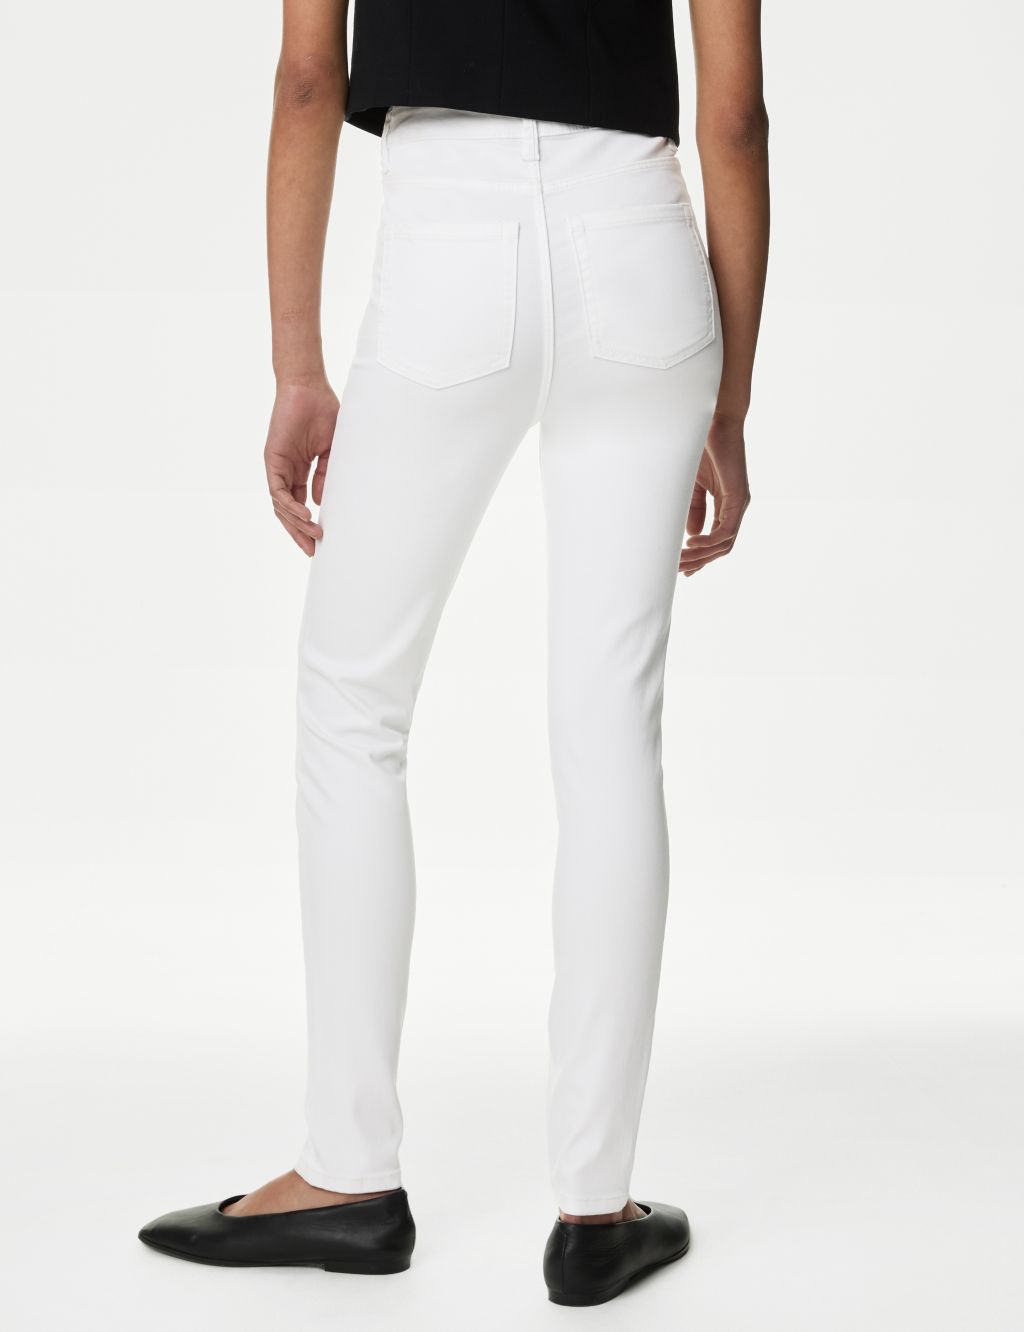 Ivy Supersoft High Waisted Skinny Jeans image 5